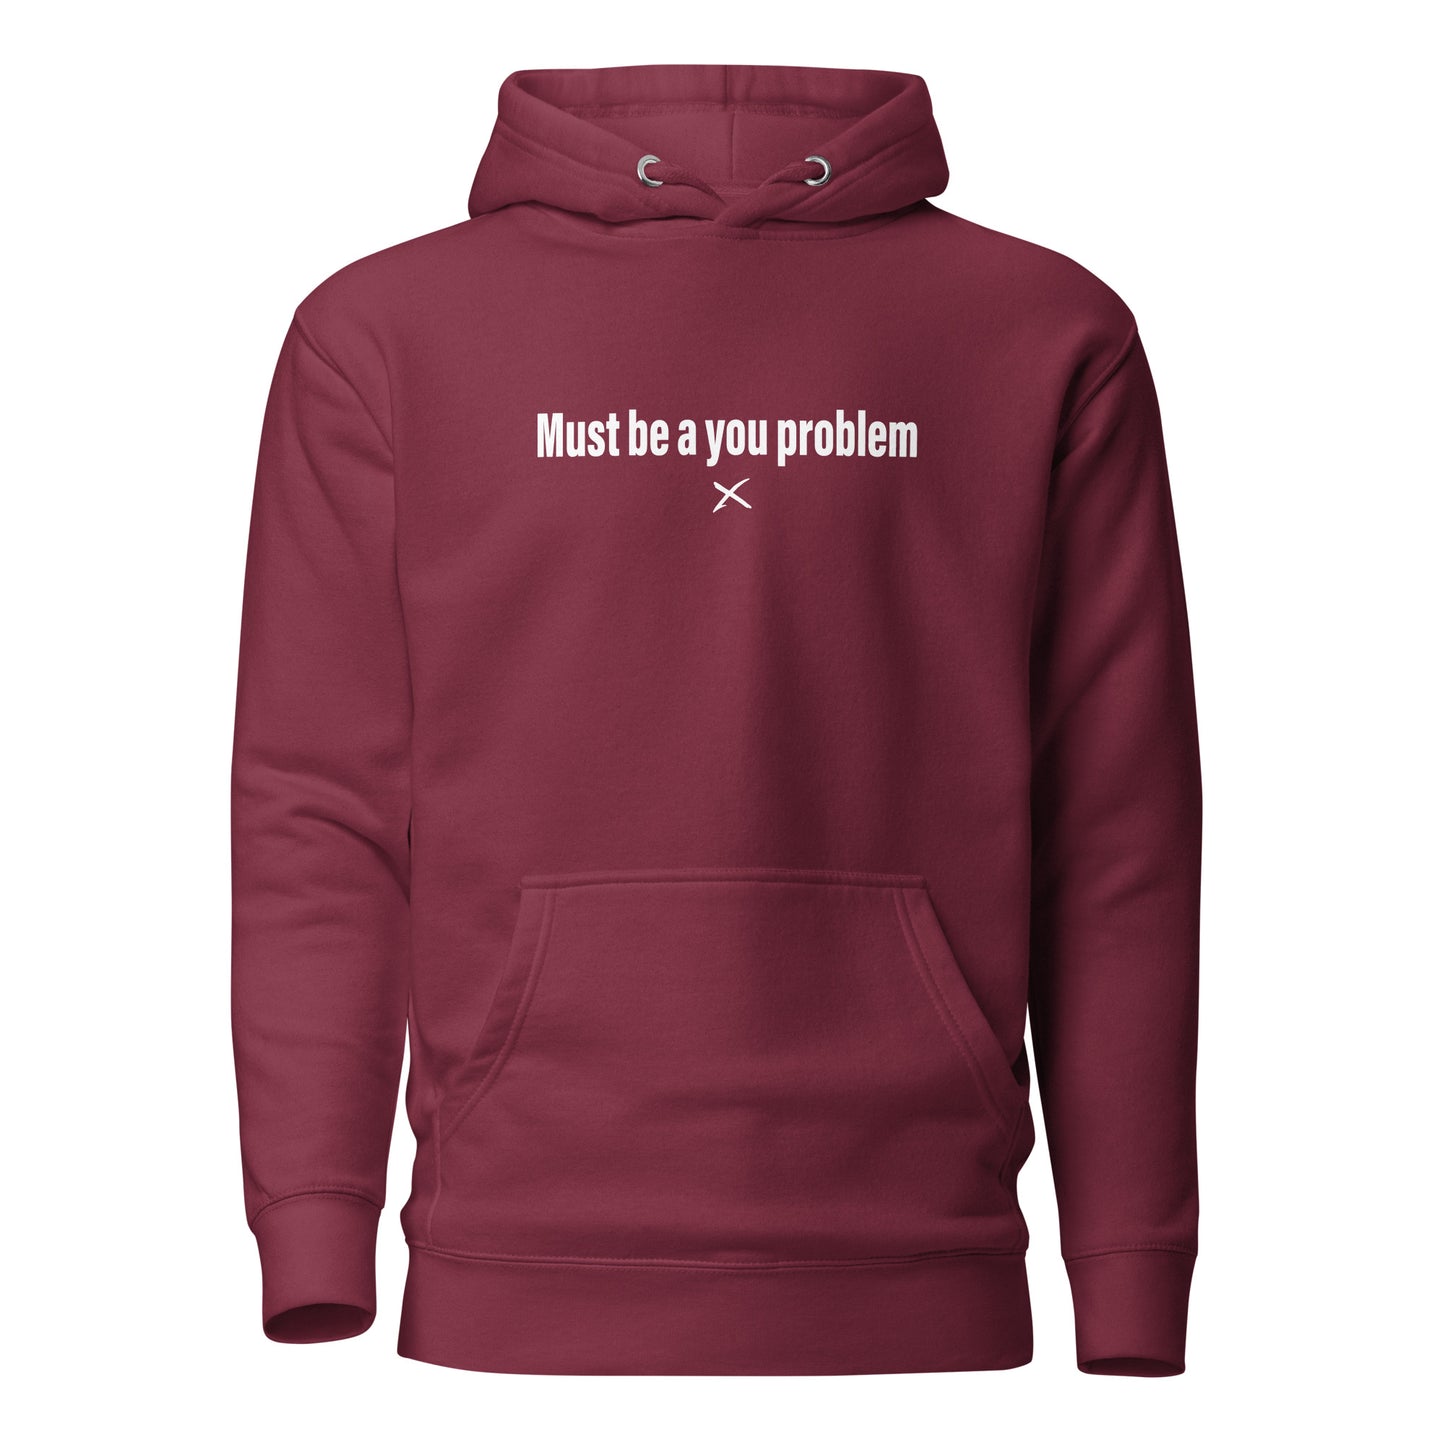 Must be a you problem - Hoodie